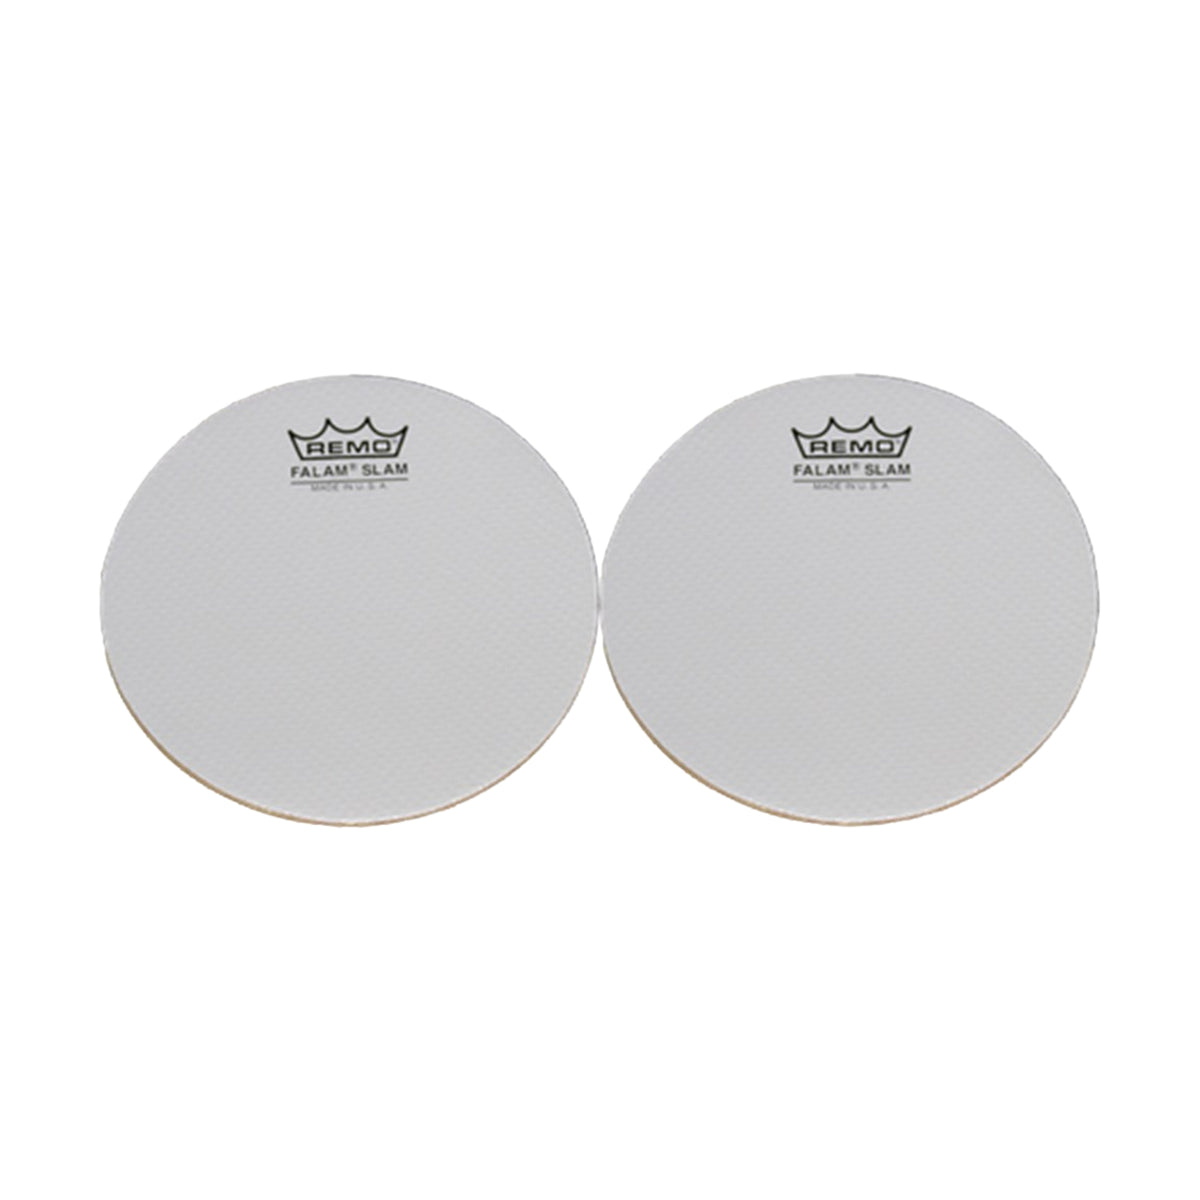 Remo Falam Slam 4 Inch Bass Drum Patches 2 Pack